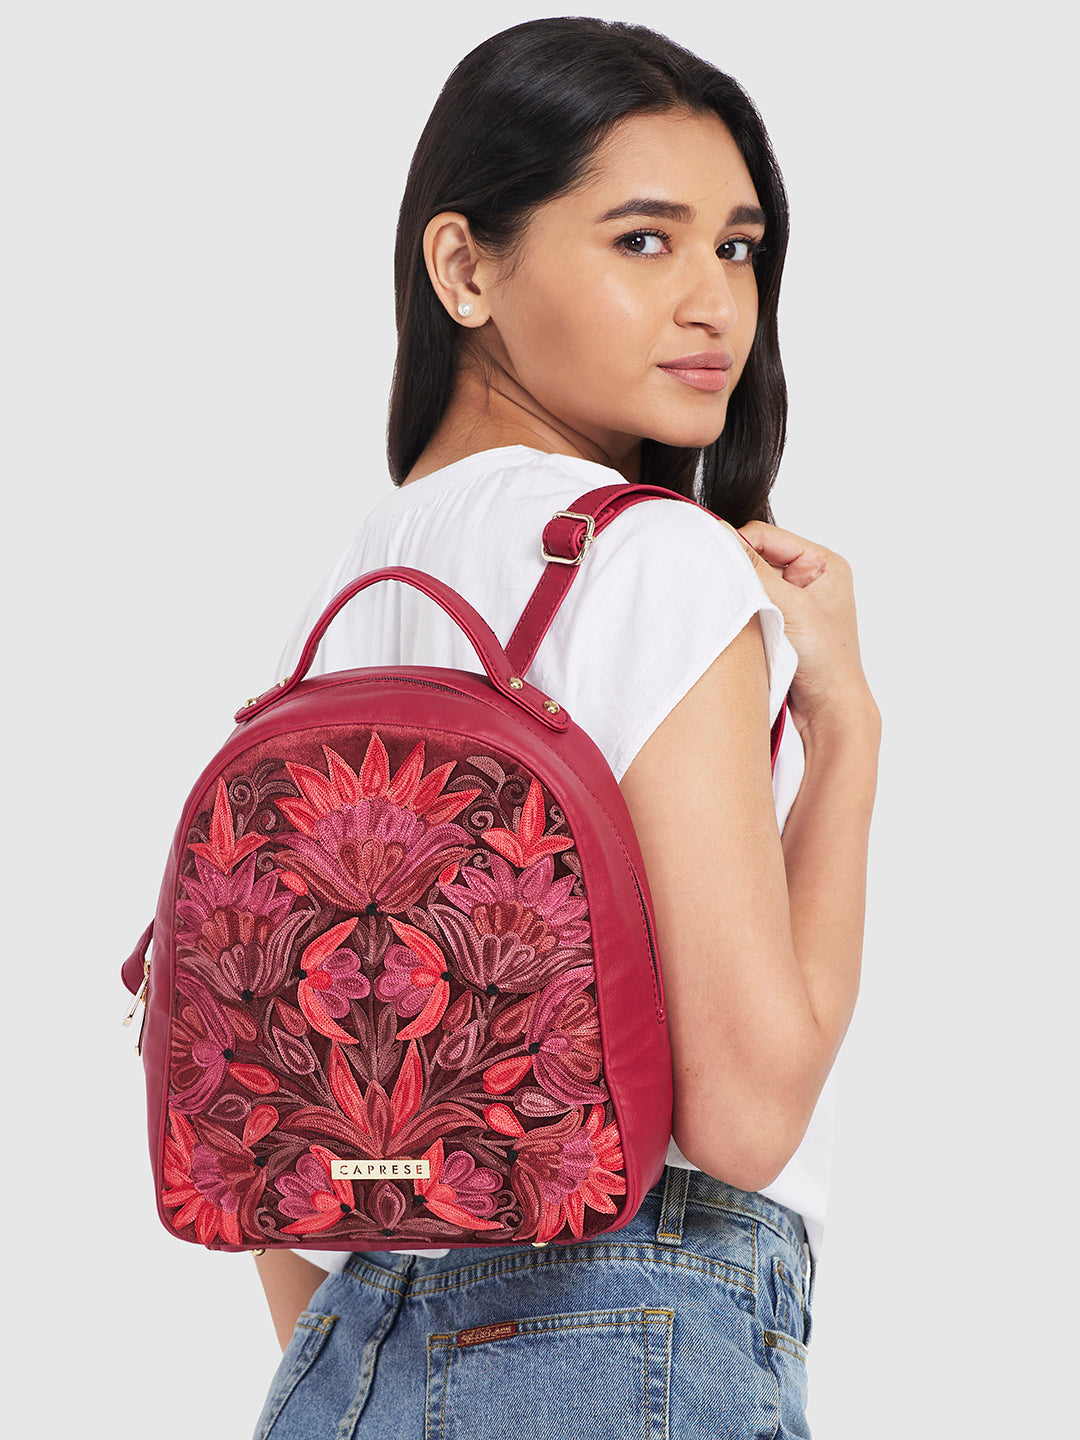 Goodhan Floral Embroidered Backpack Purse for Women Small Travel Handbag  Shoulder Bag, Black : Amazon.in: Fashion